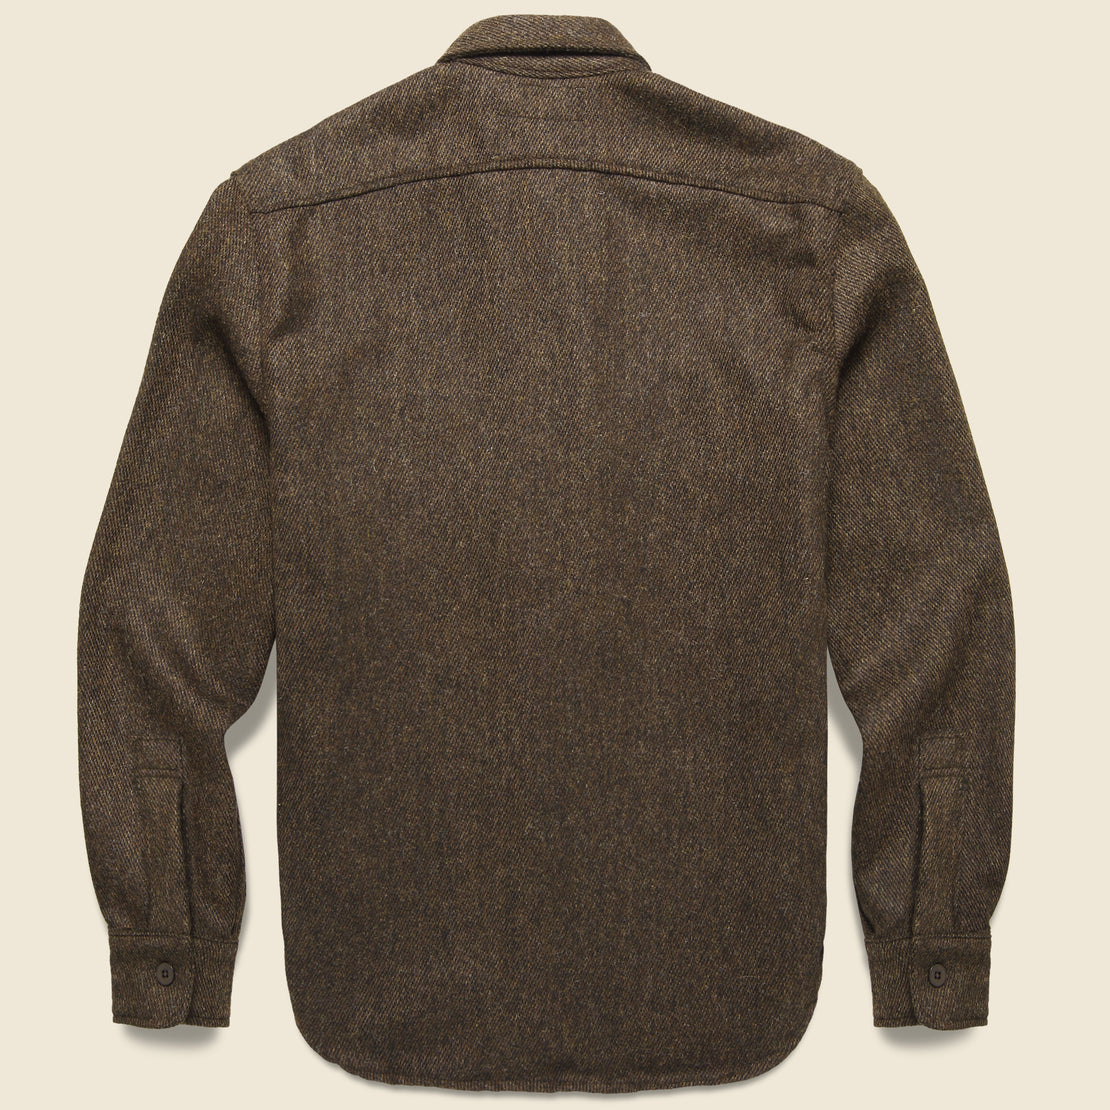 Hall CPO Wool Overshirt - Brown - Imogene + Willie - STAG Provisions - Tops - L/S Woven - Overshirt